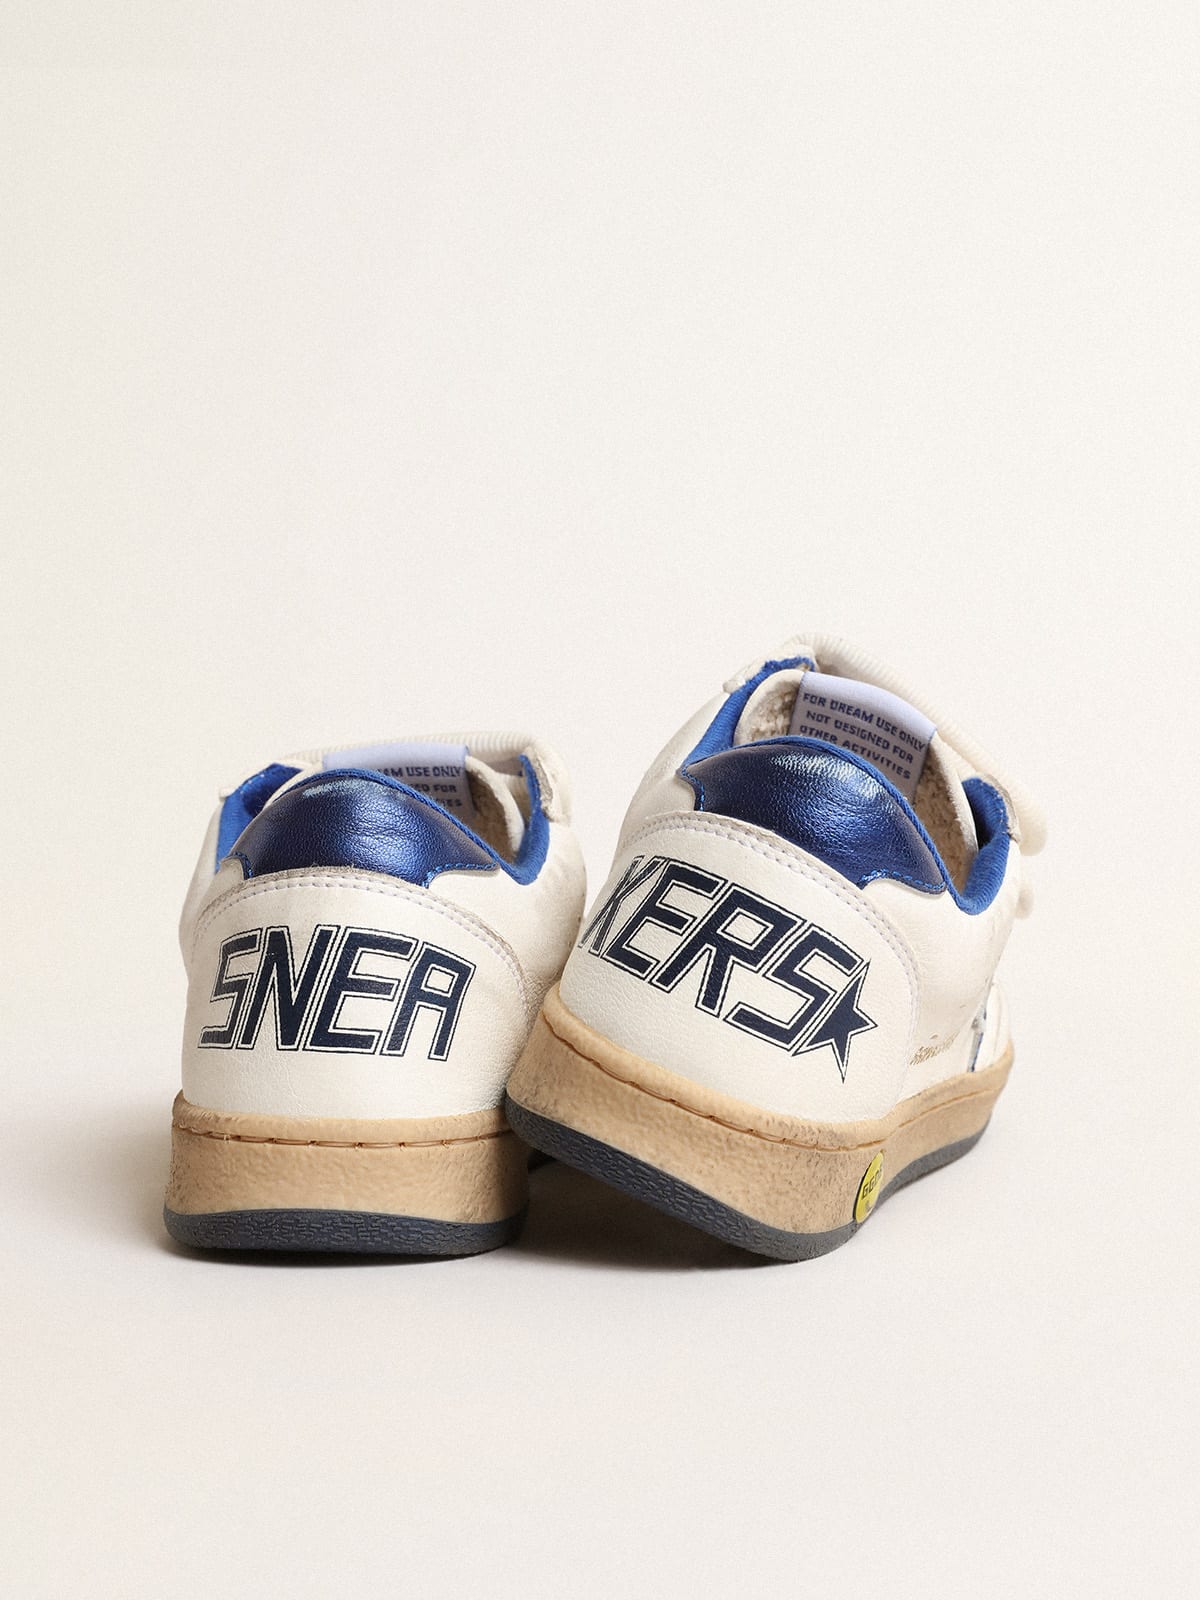 Golden Goose - Ball Star Young with blue metallic leather star and heel tab in 